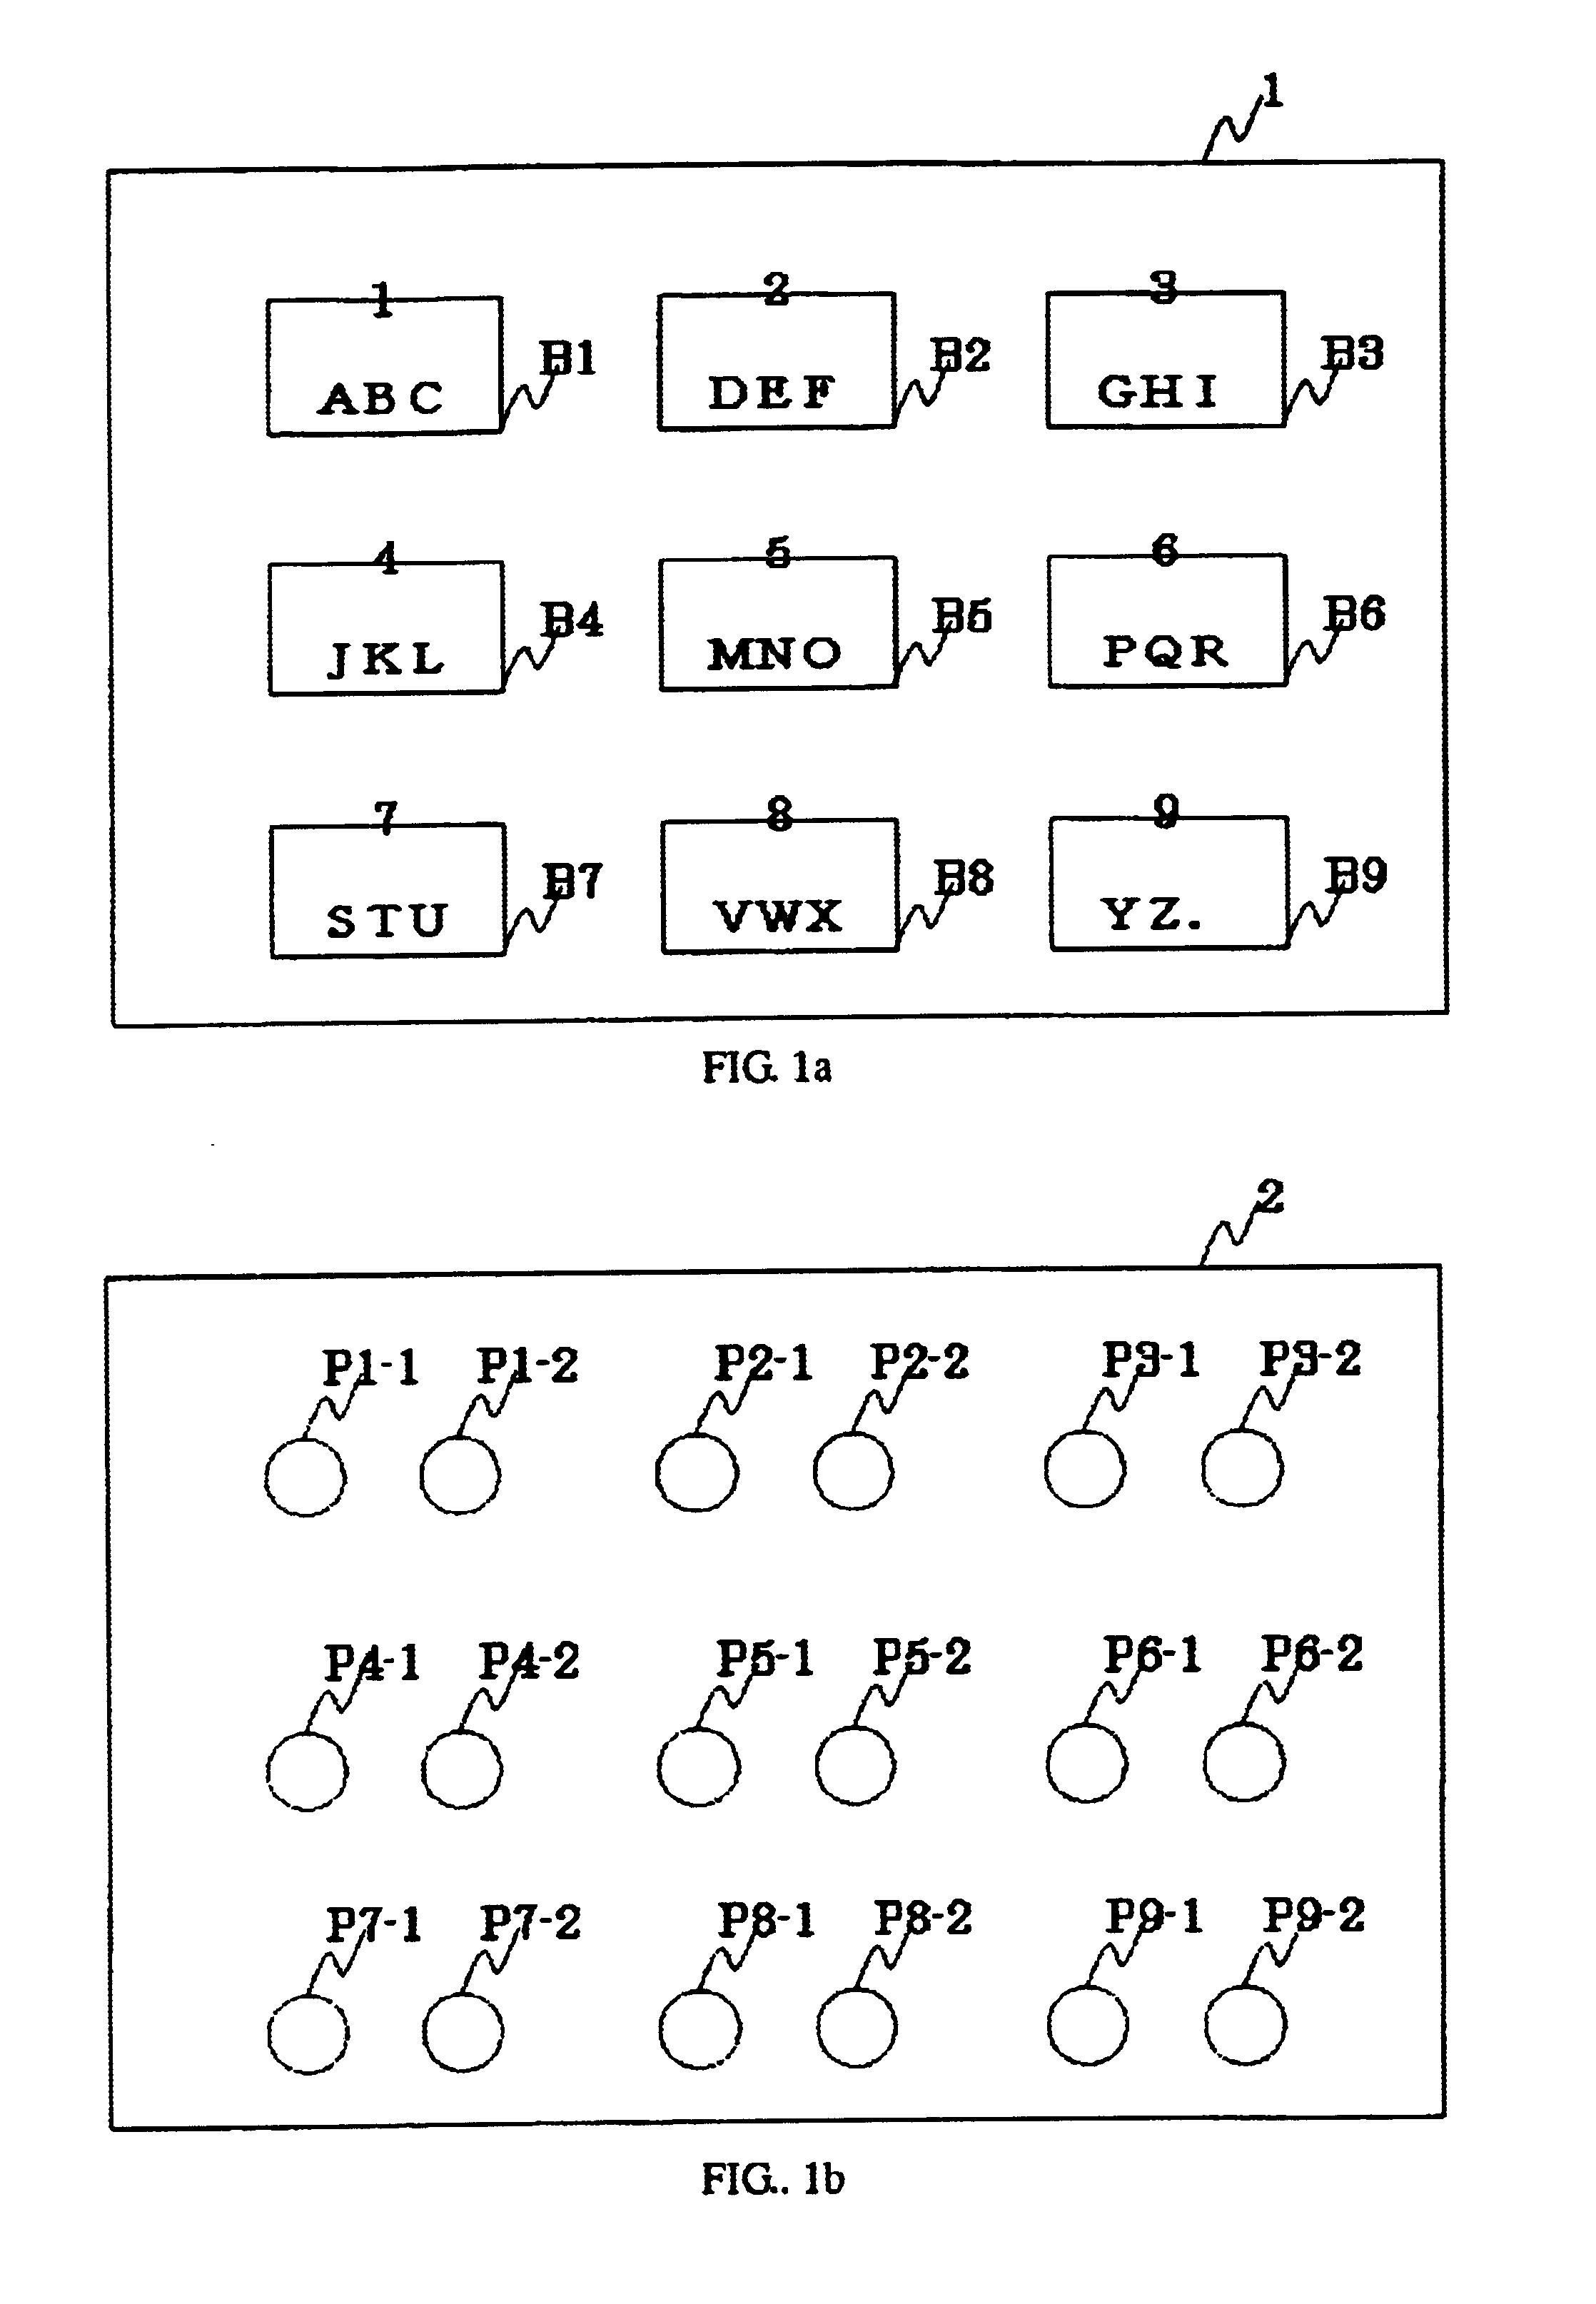 Keypad apparatus and method for inputting data and characters for a computing device or cellular phone